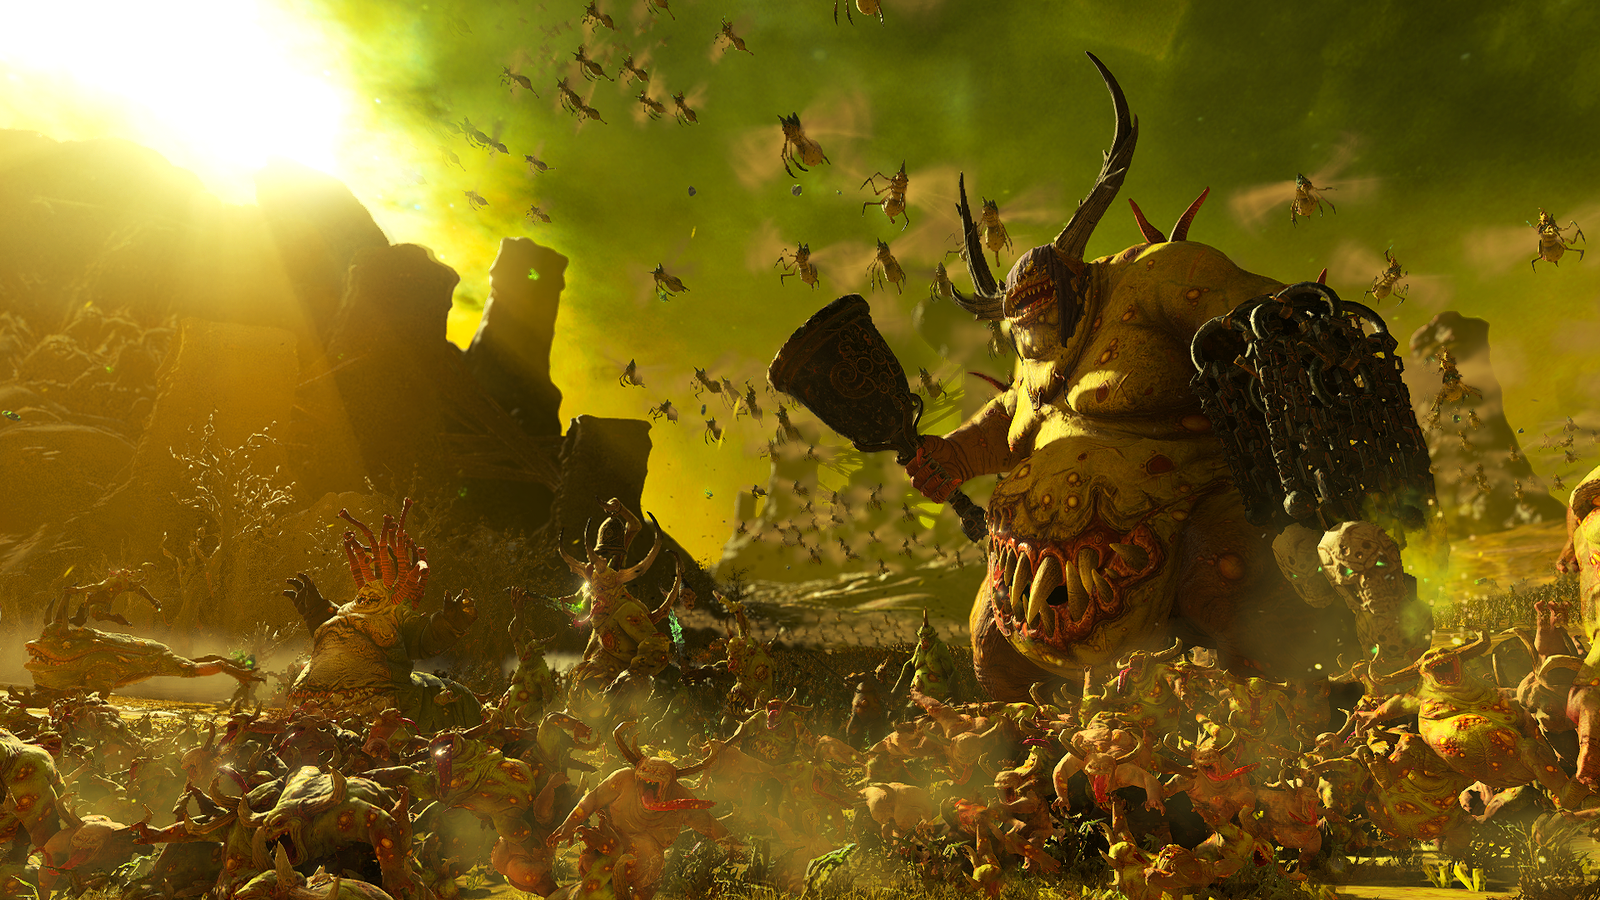 A battlefield in Total War: WARHAMMER III featuring the forces of the Daemon Prince Nurgle